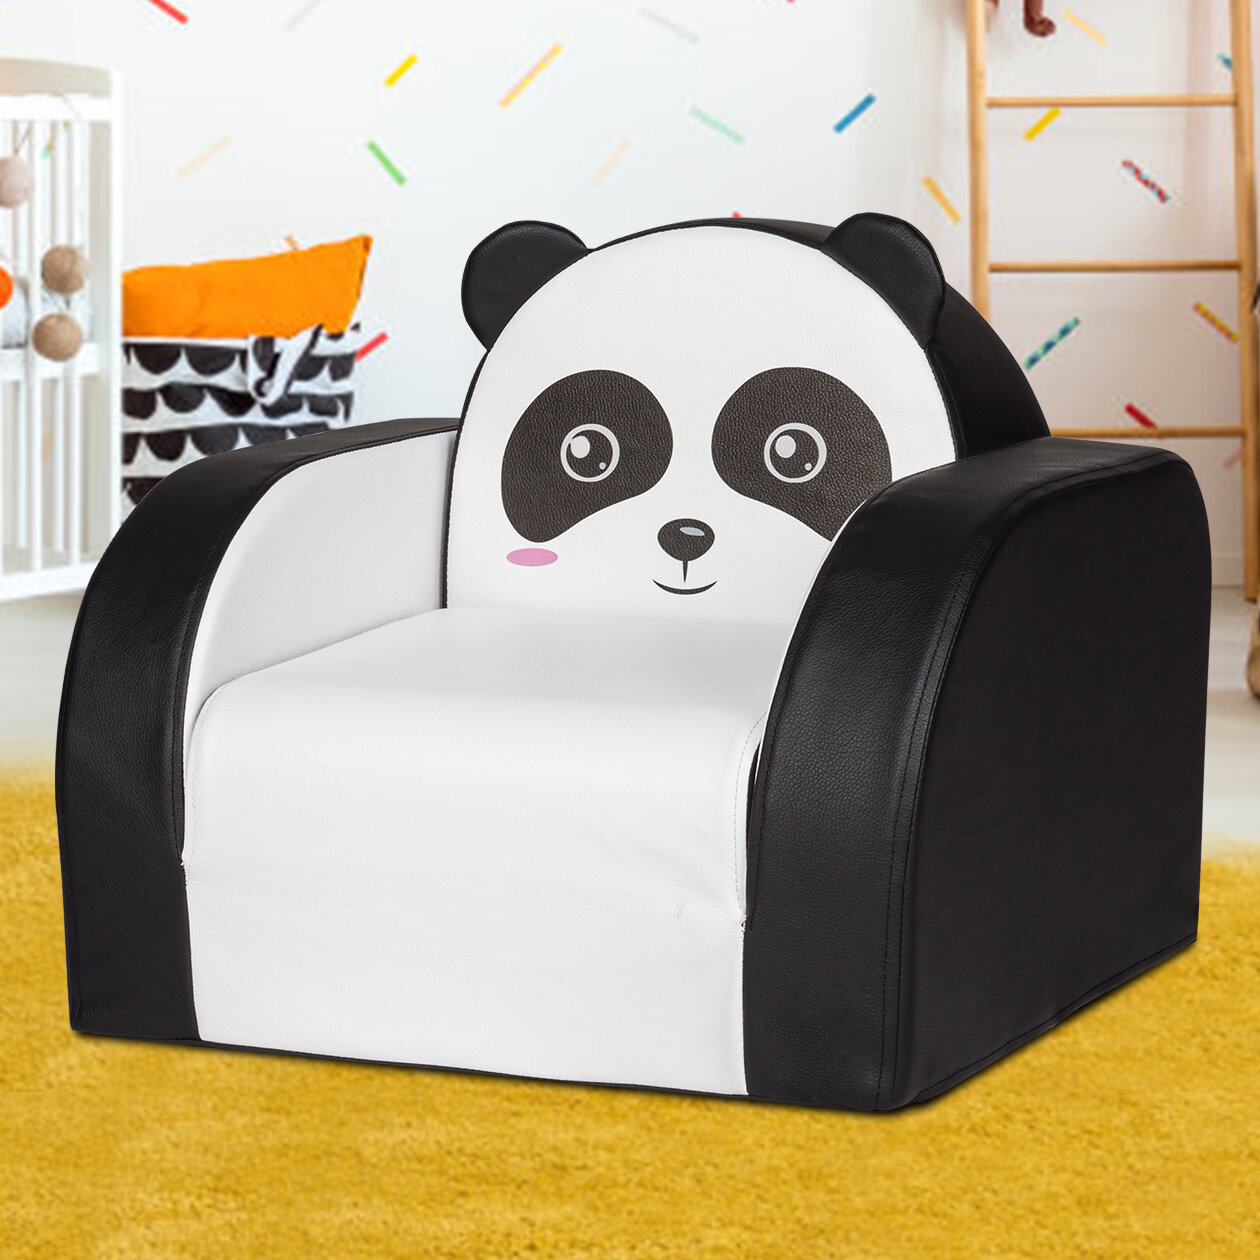 Kids Leather Wild Animal Sofa Armrest Chair Toddler Lounge Cushion Couch Panda 